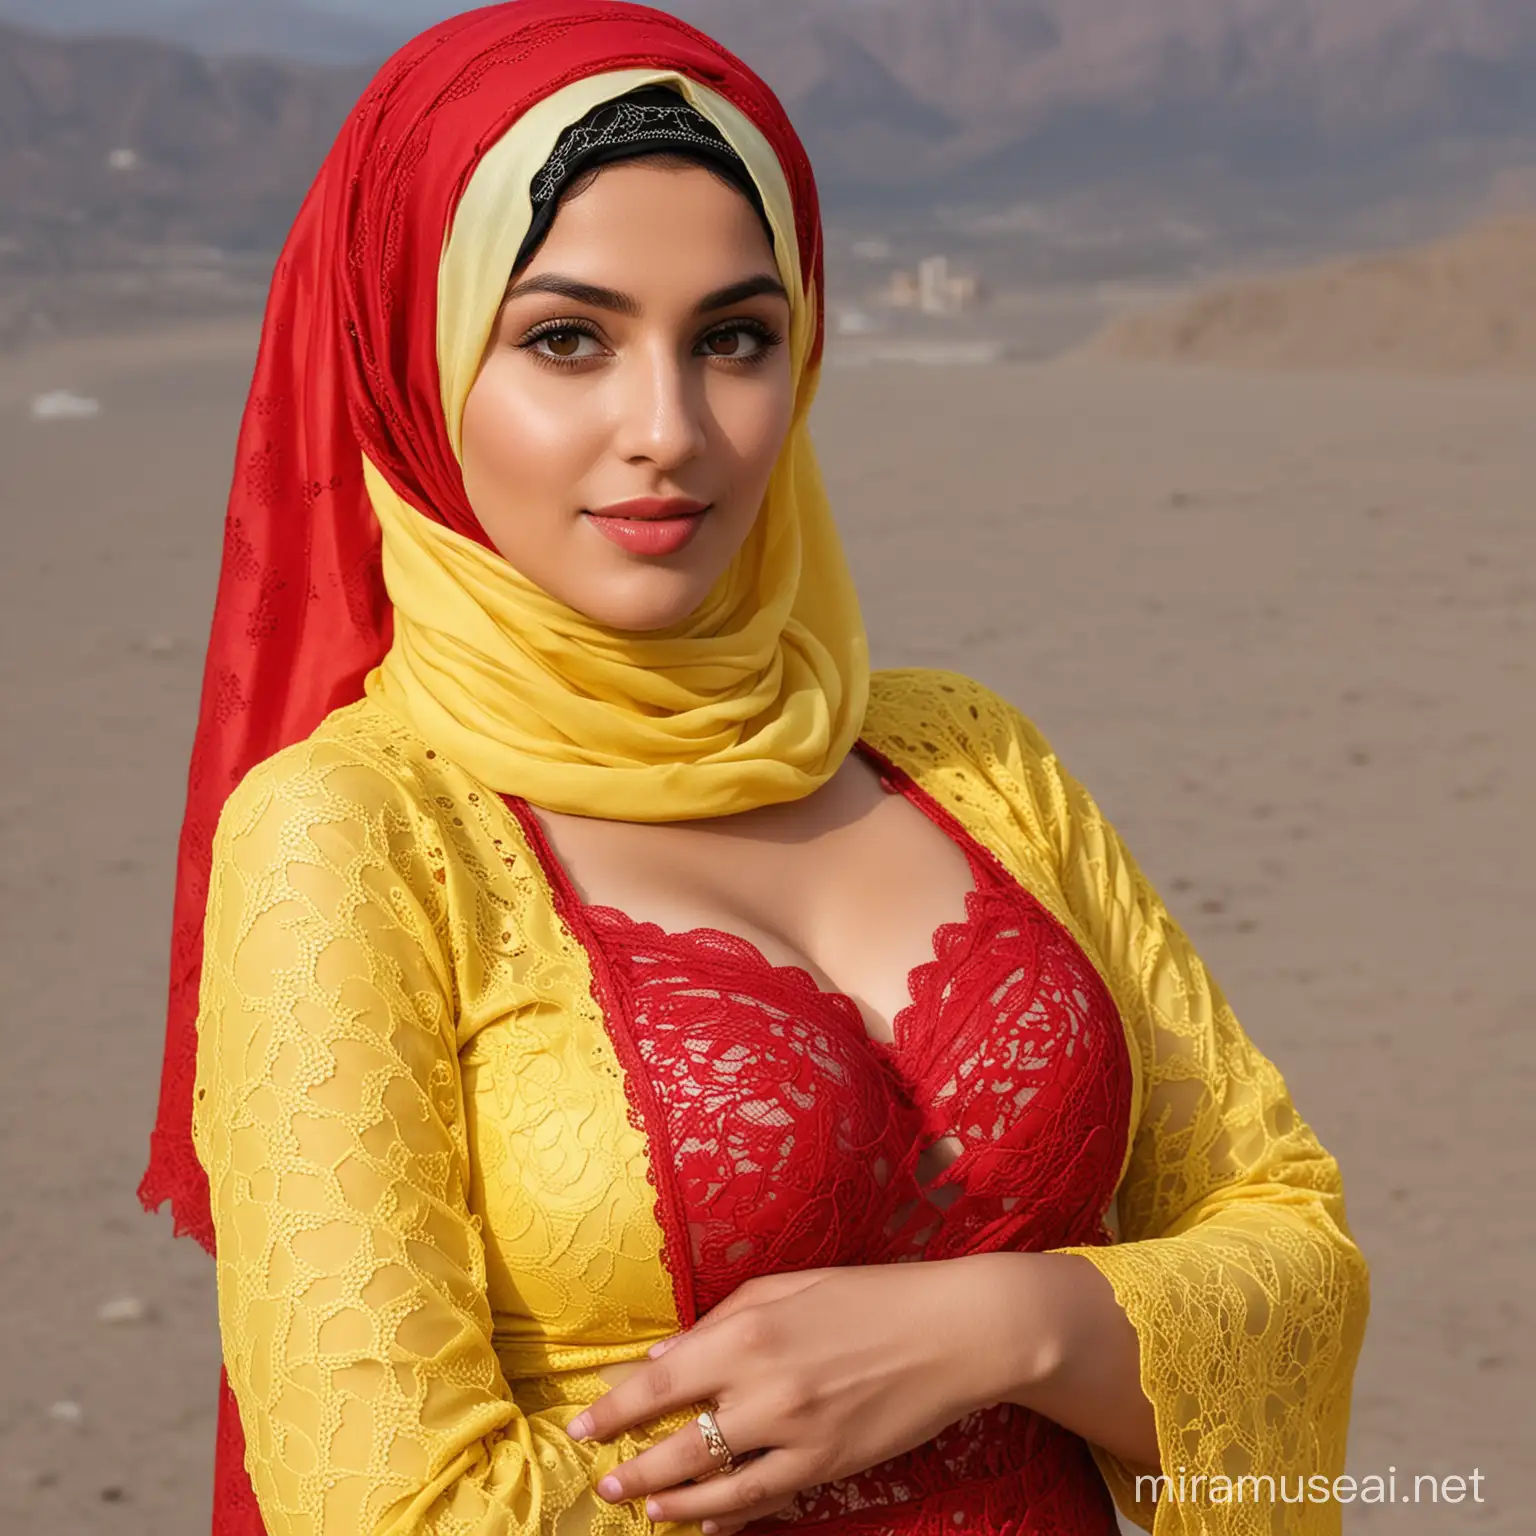 A picture of a beautiful girl in Oman, wearing a hijab, a red scarf, very big breasts and a yellow lace dress